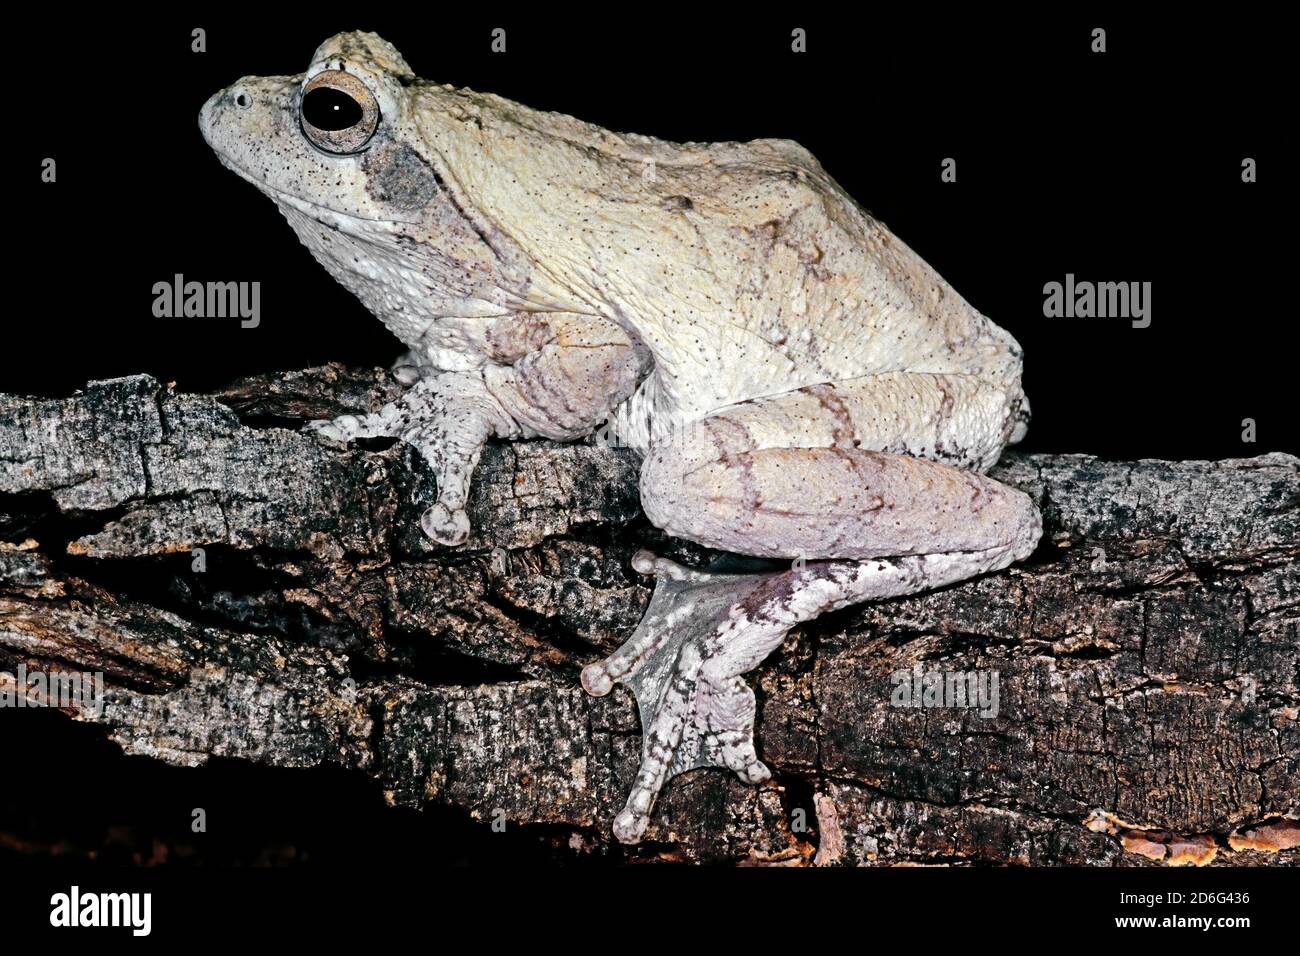 A foam nest frog (Chiromantis xerampelina) camouflaged on the bark of a tree, South Africa Stock Photo